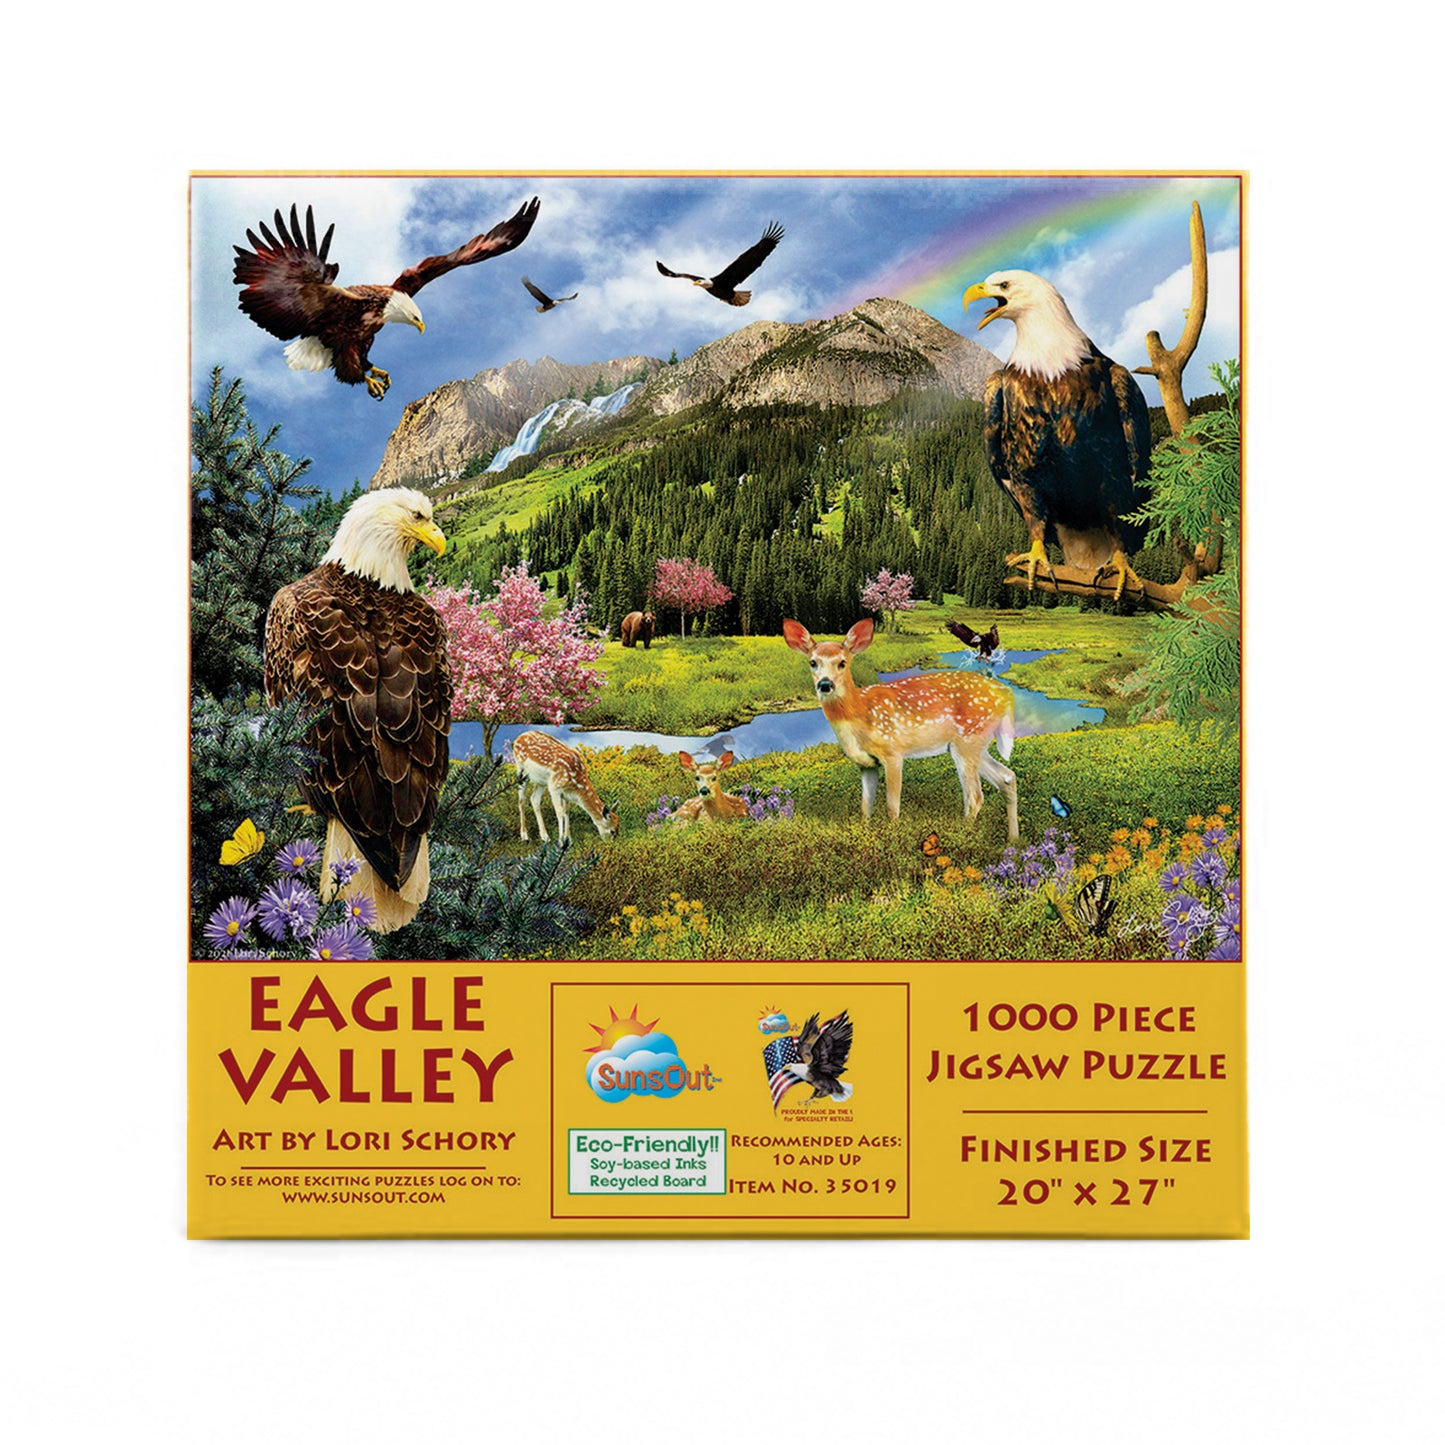 Eagle Valley - 1000 Piece Jigsaw Puzzle